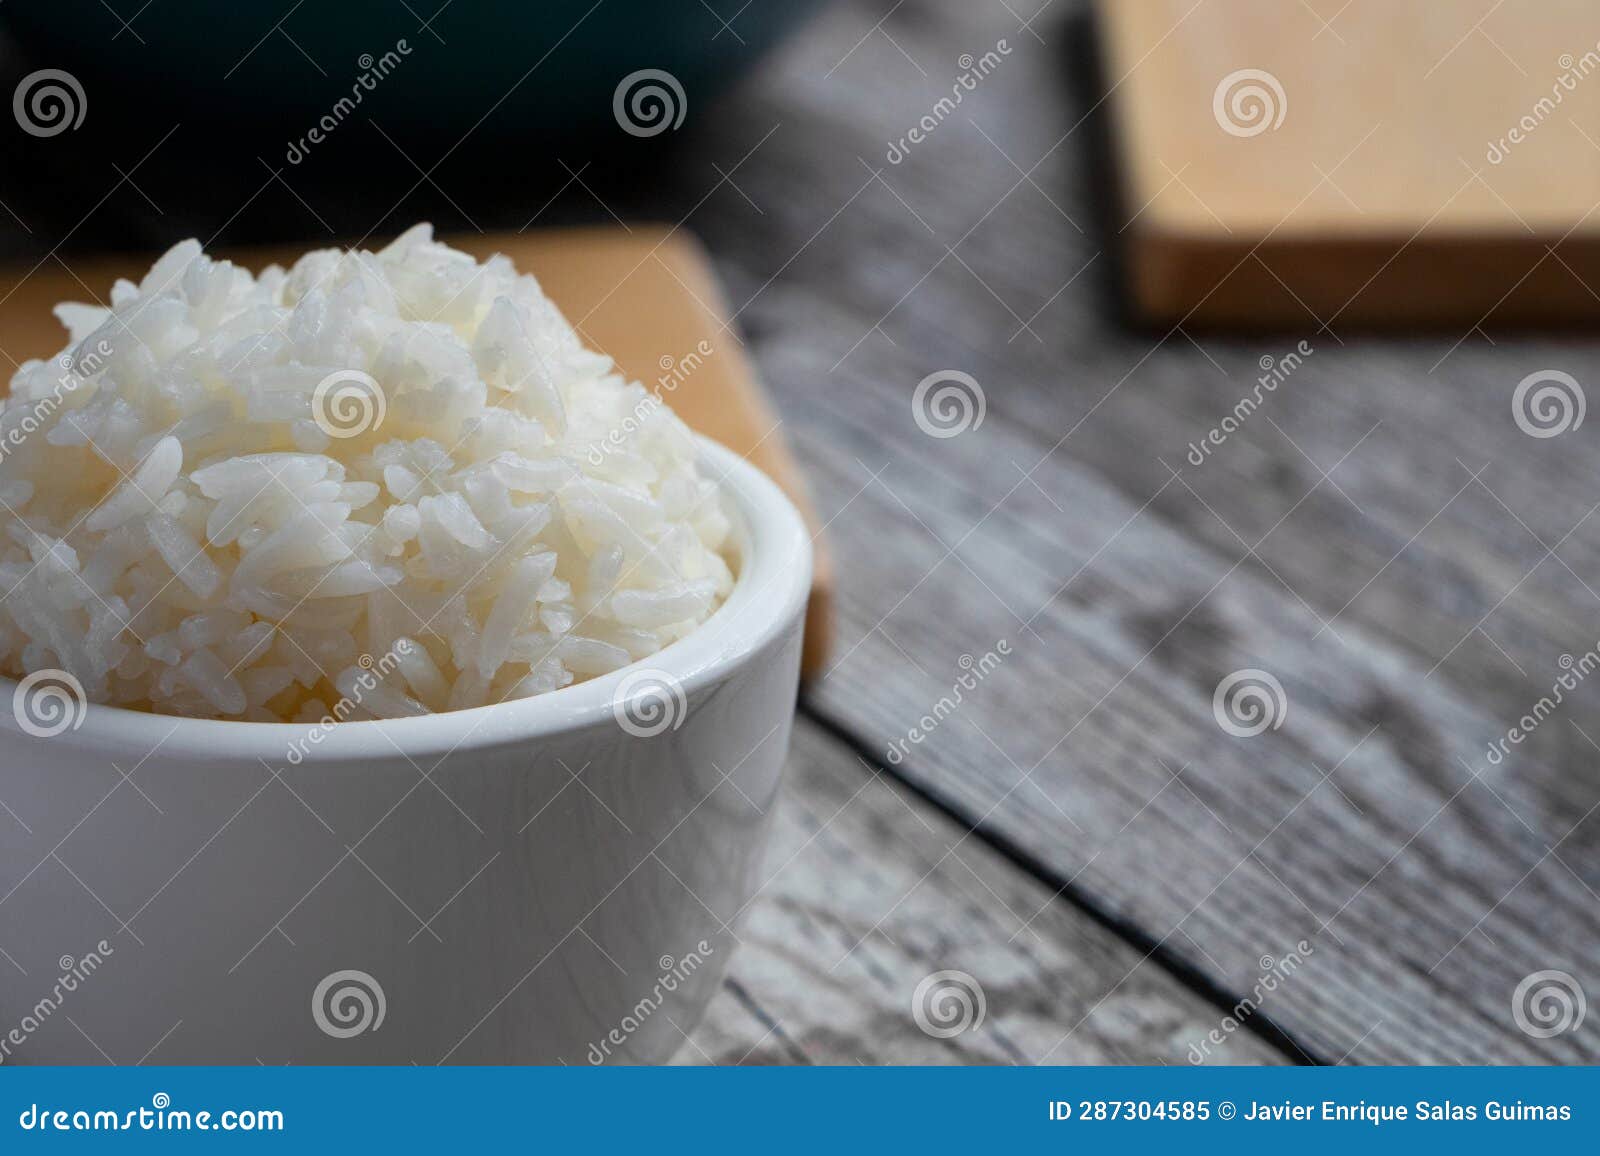 small bowl with rice in the foreground and some kitchen utensils